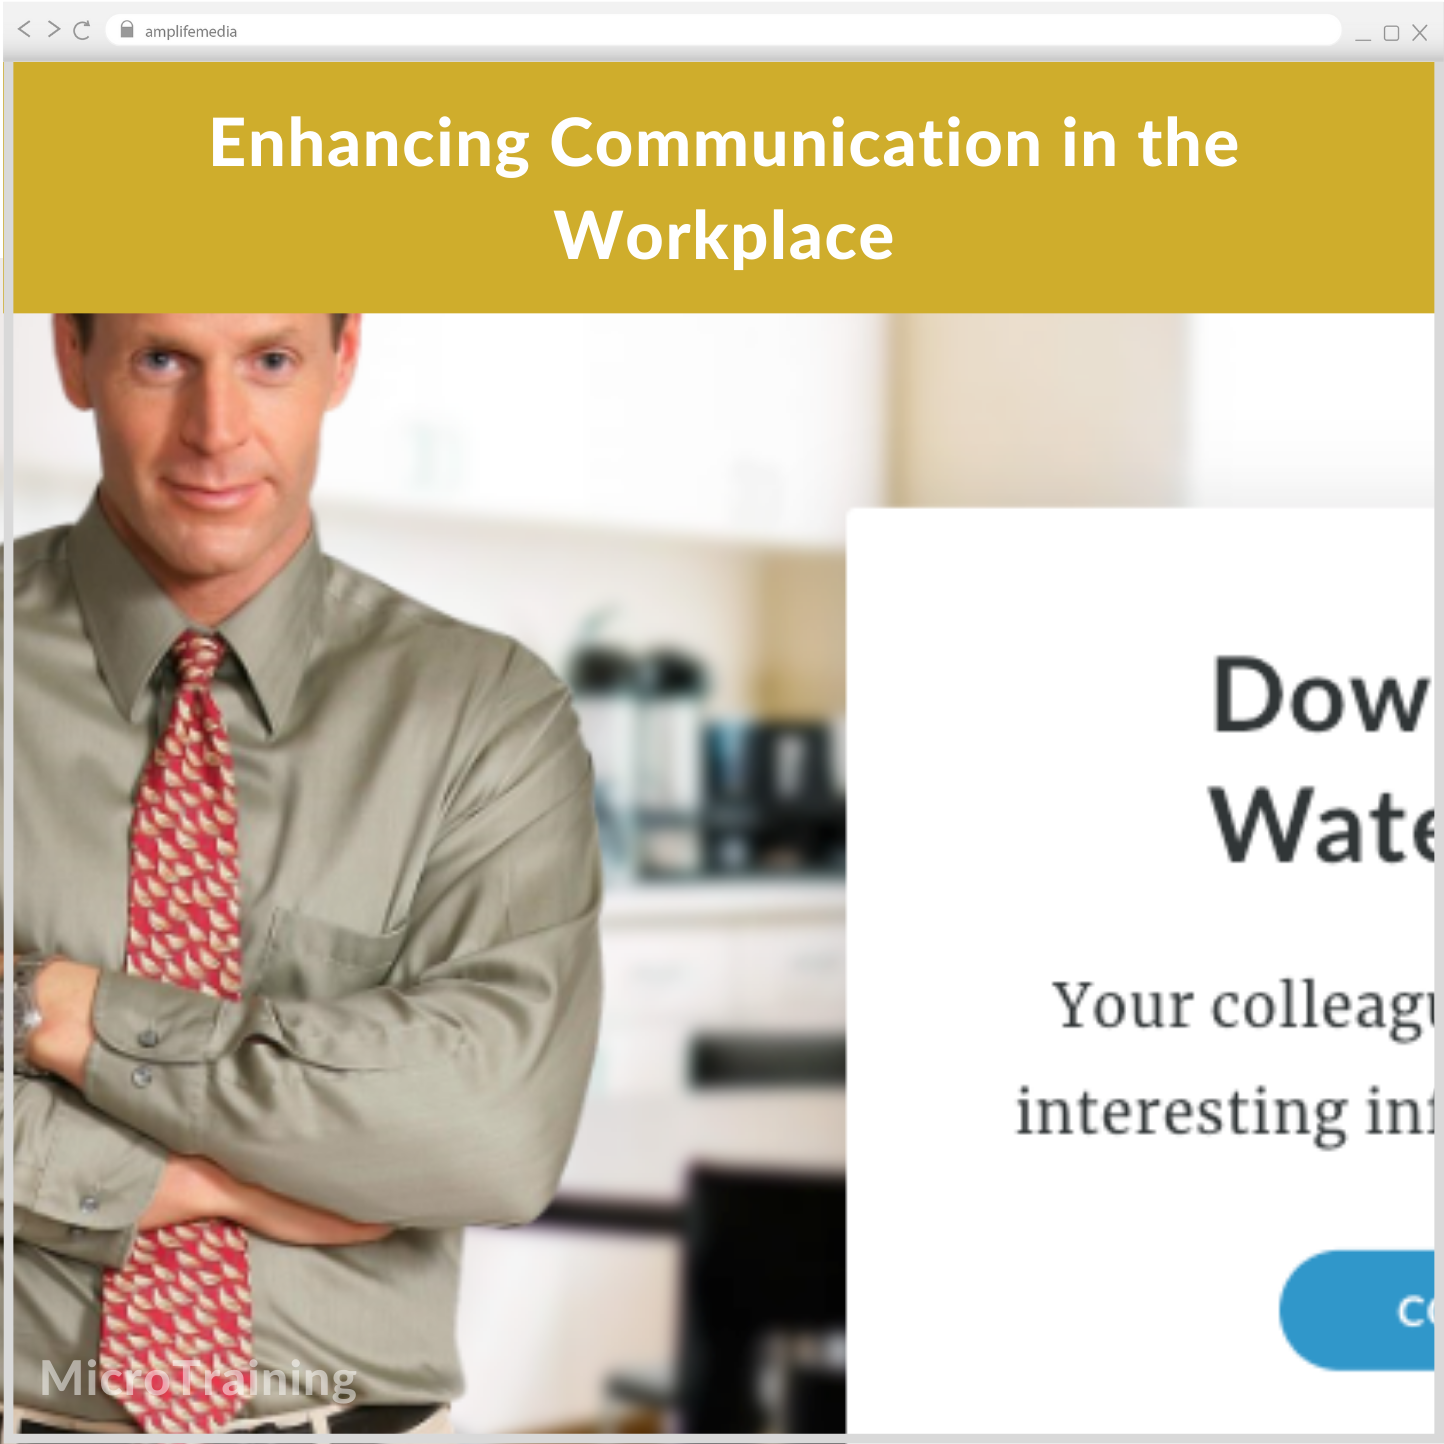 Subscription to Wellbeing Media: Enhancing Communication in the Workplace MT 1221